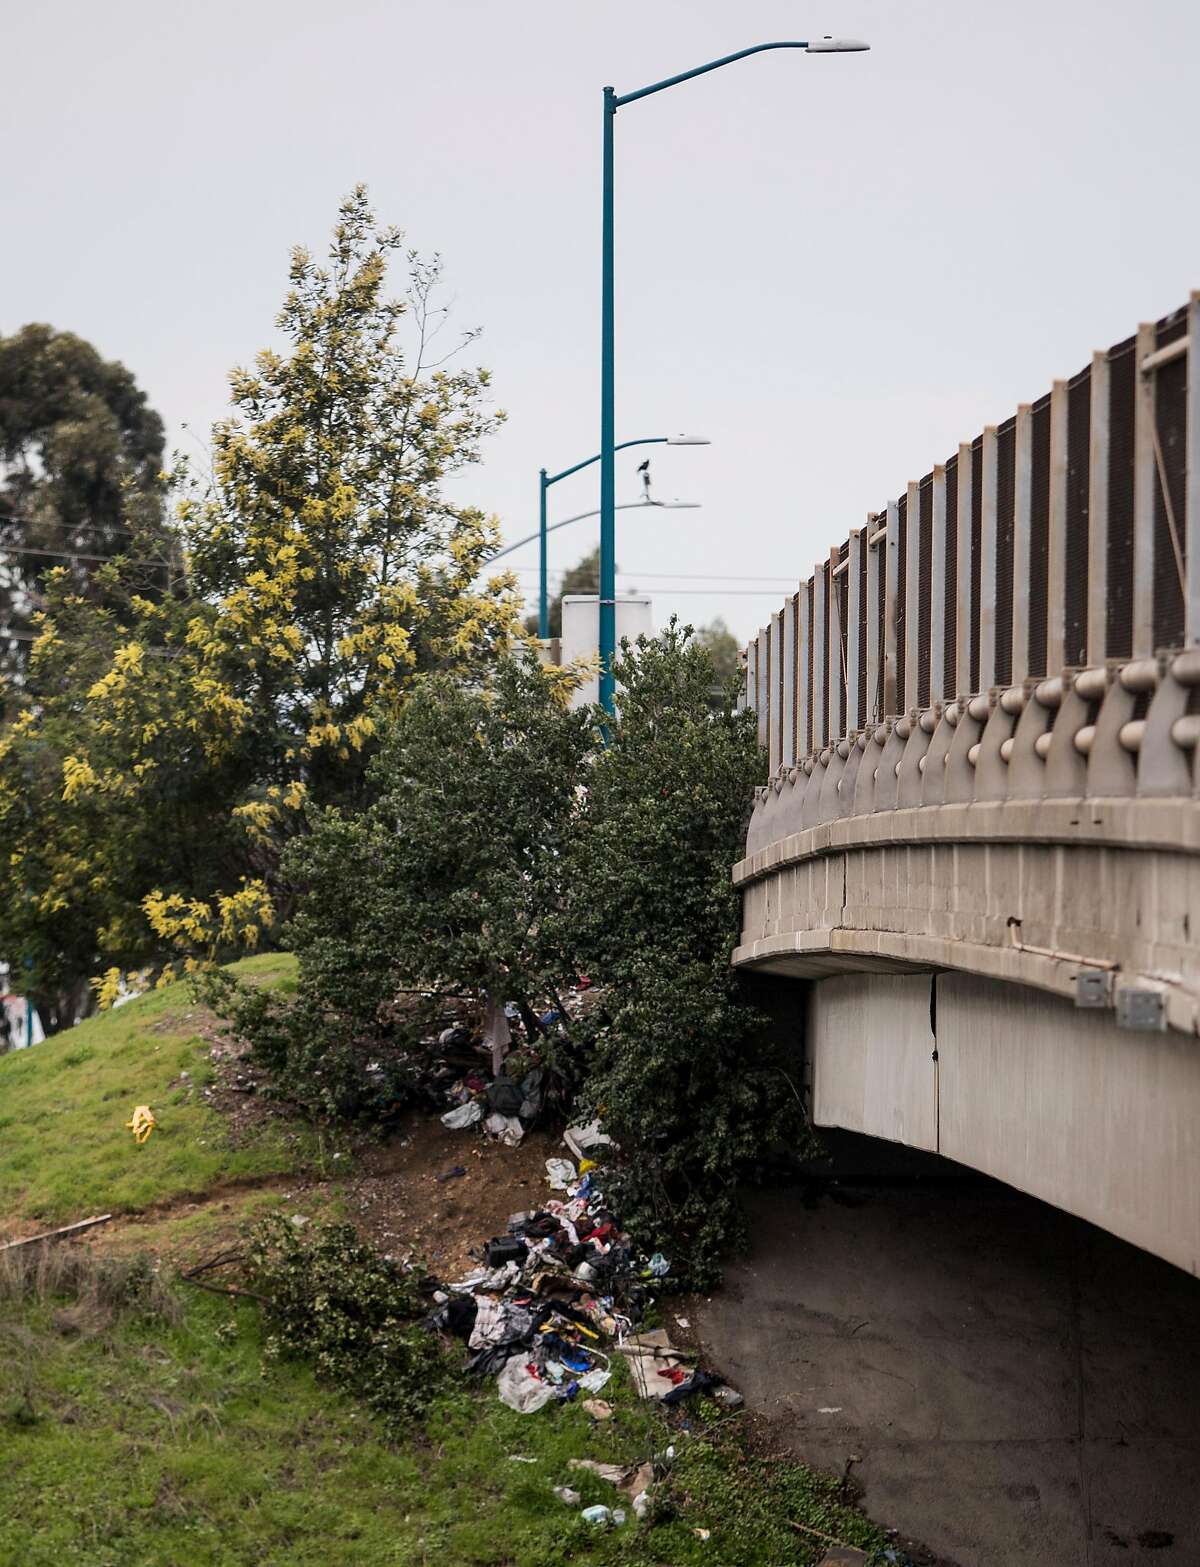 A pile of illegally dumped trash gathers around the overpass at Zhone Way along Highway 880 in Oakland, Calif. Tuesday, Feb. 12, 2019.